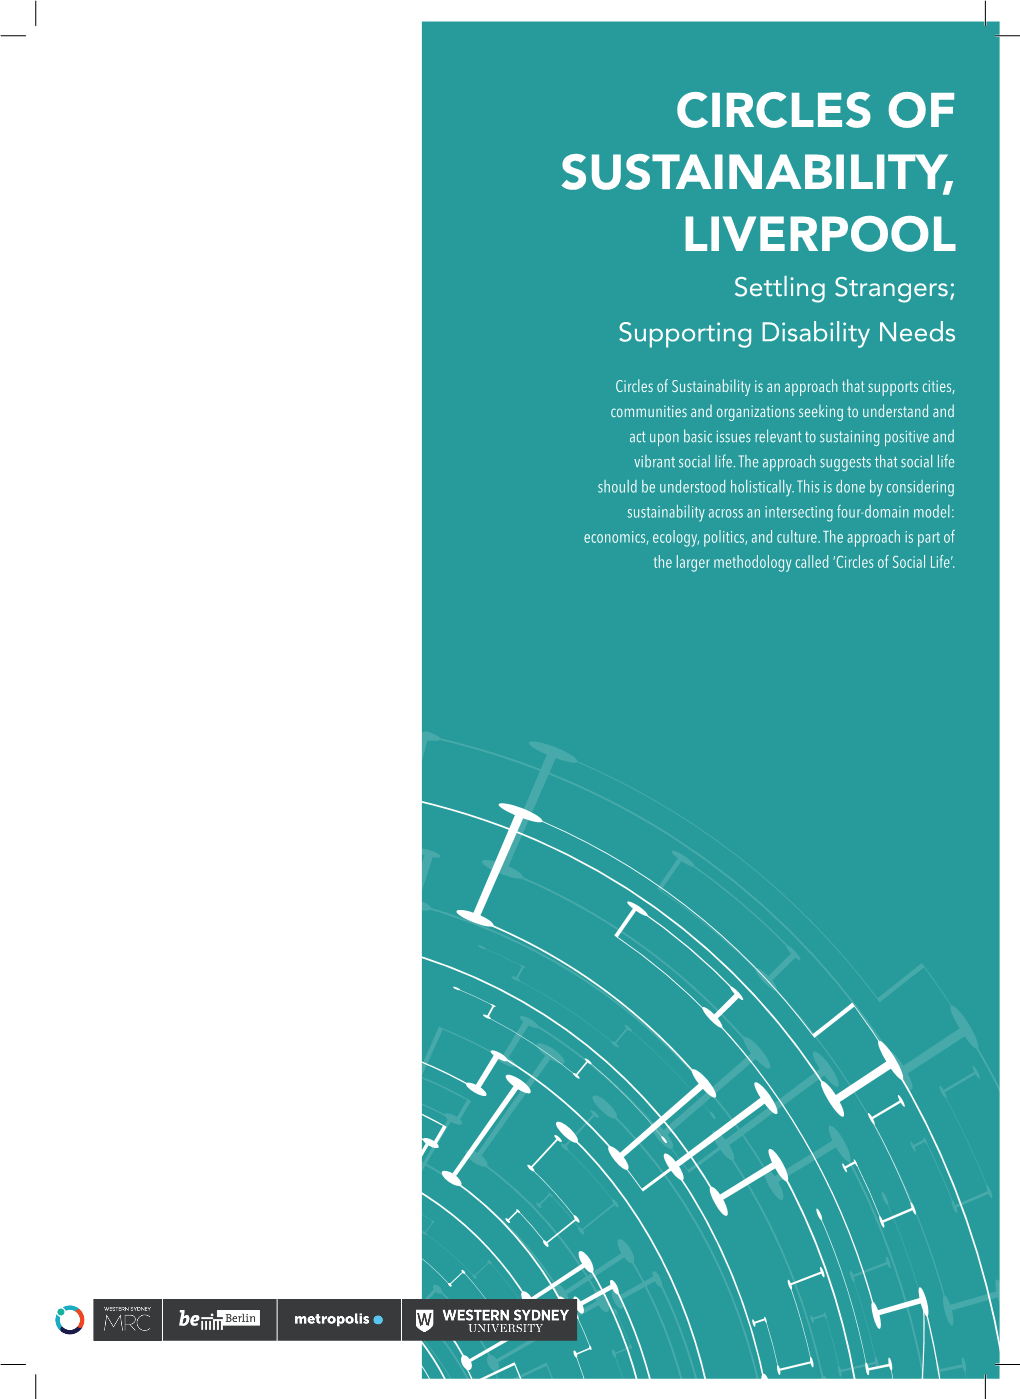 Circles of Sustainability, Liverpool – Settling Strangers